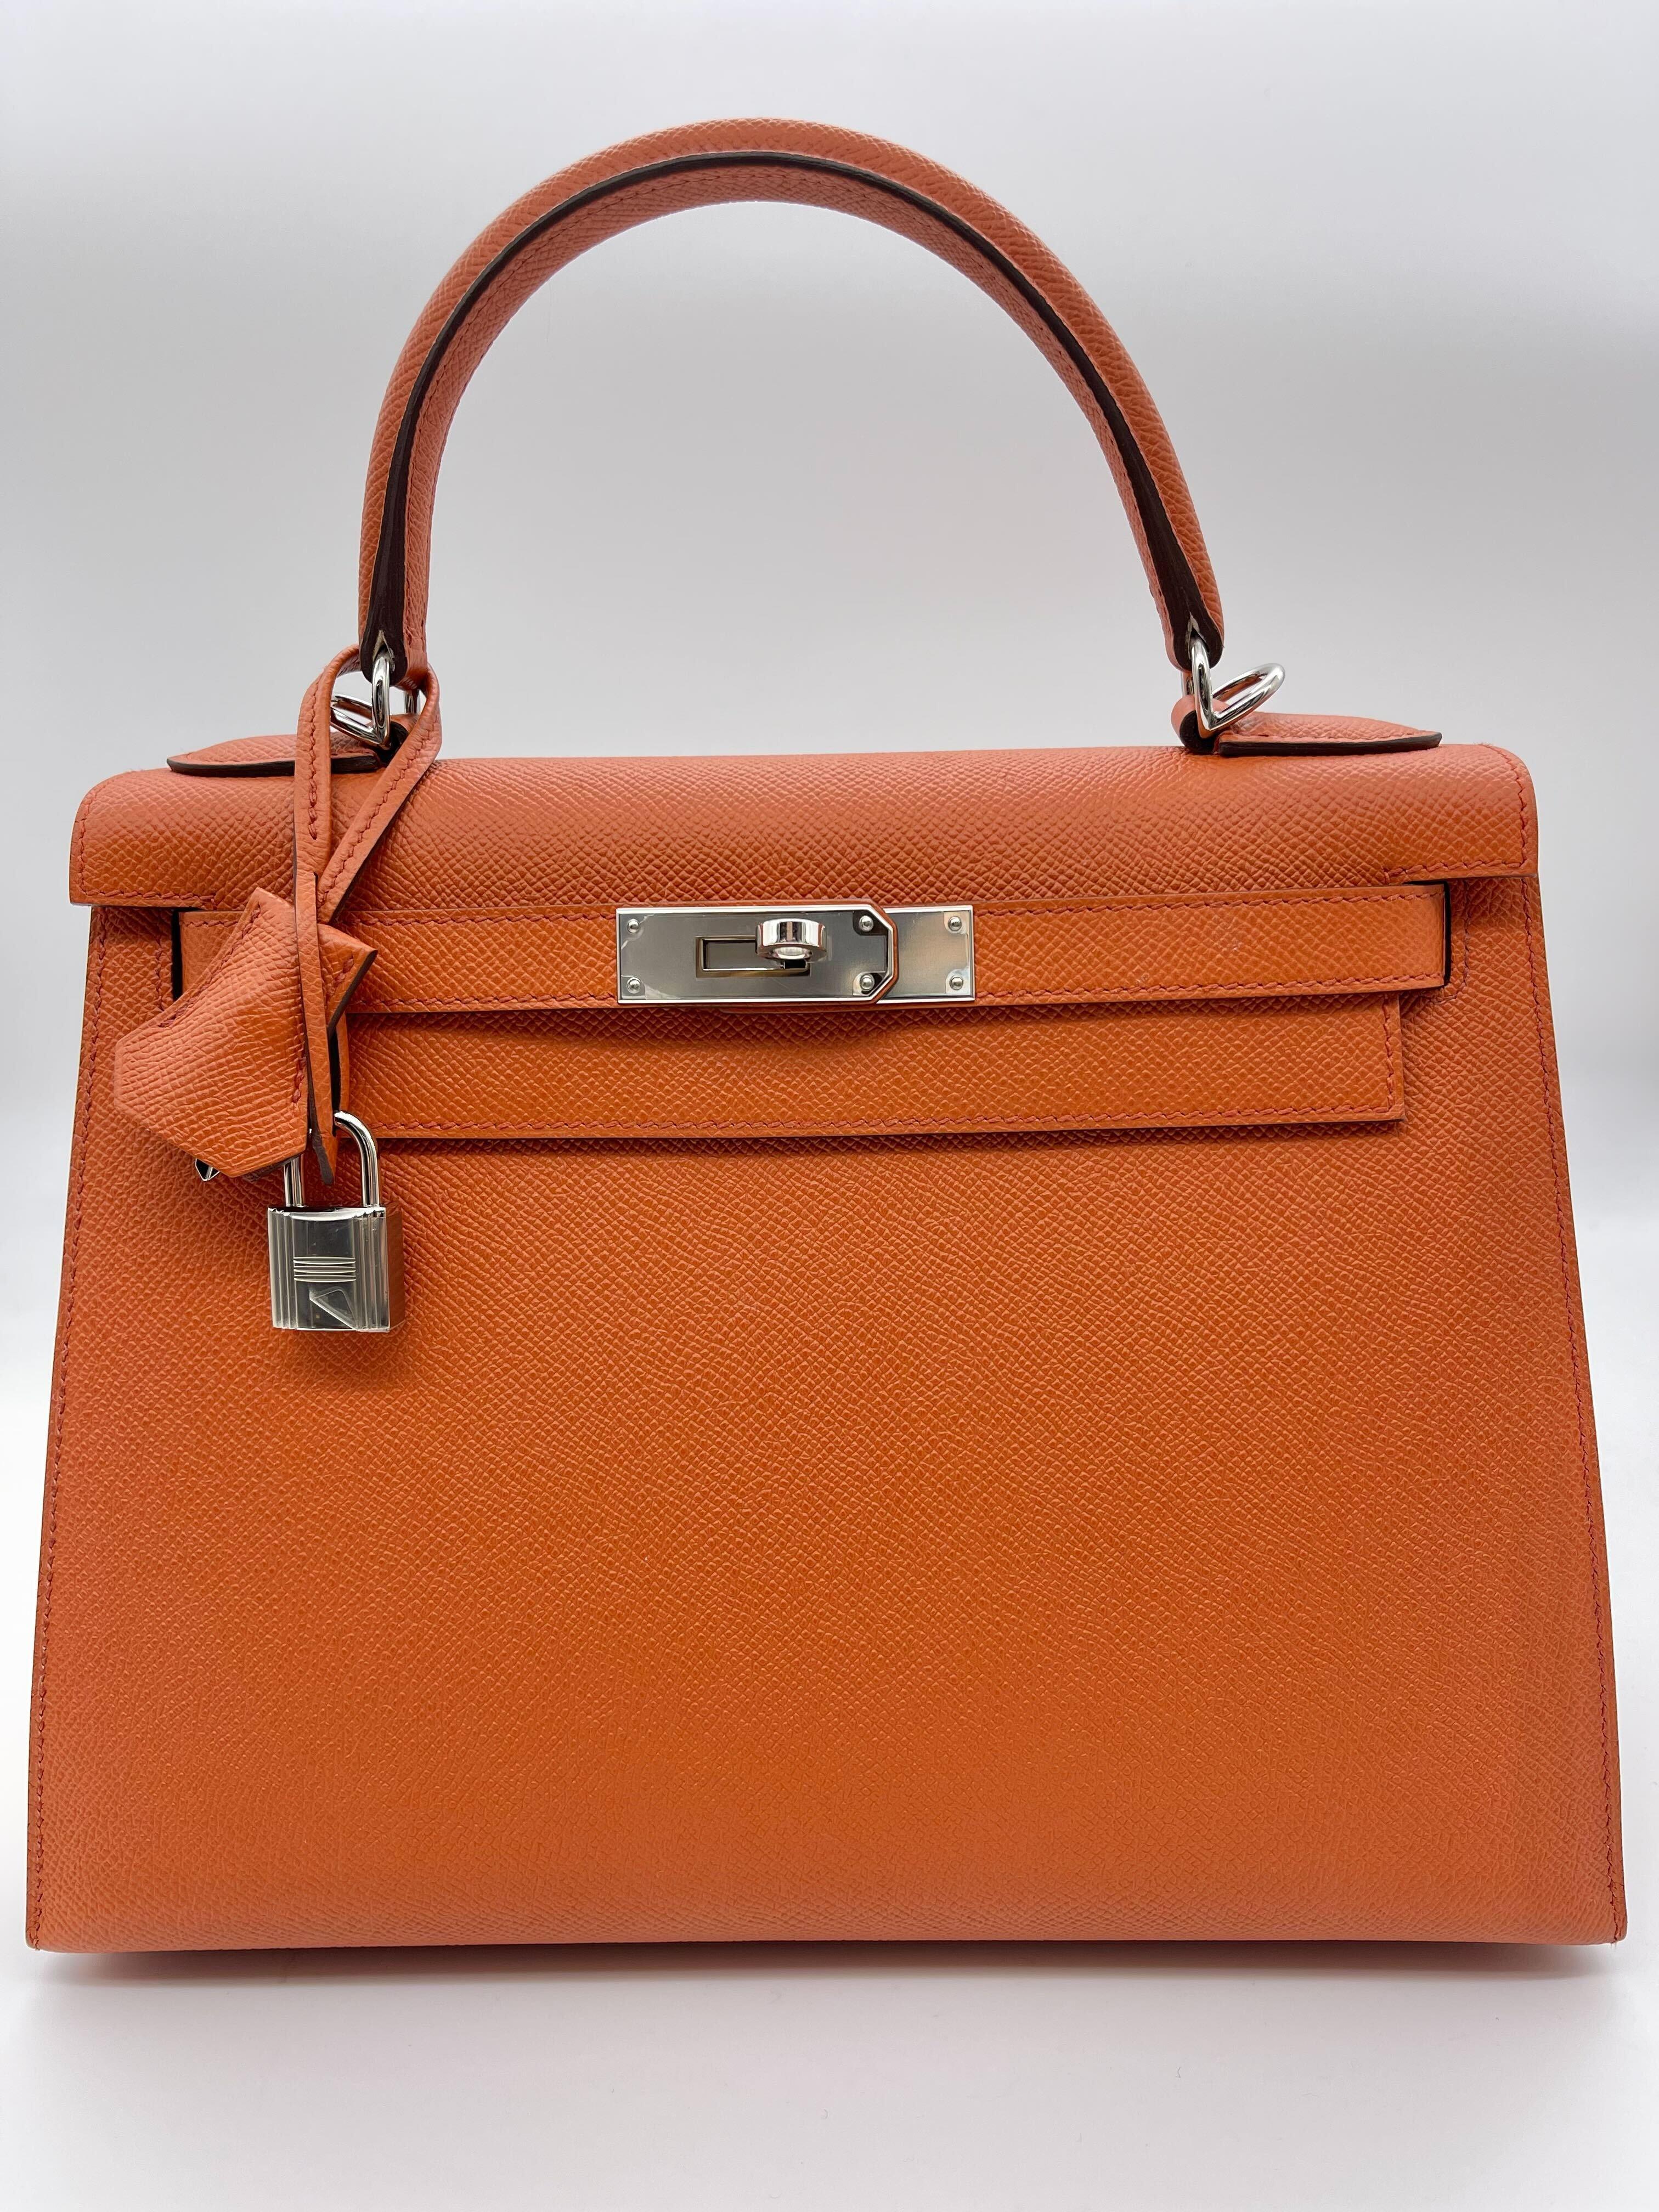 Hermes Kelly 28 Potiron Orange Epsom Leather Palladium Hardware

Condition: New
Material: Epsom Leather
Measurements: 28cm (w) x 22cm (h) x 10cm (d)
Hardware: Palladium plated
 
*Comes with full original packaging.
*Full stickers on hardware.